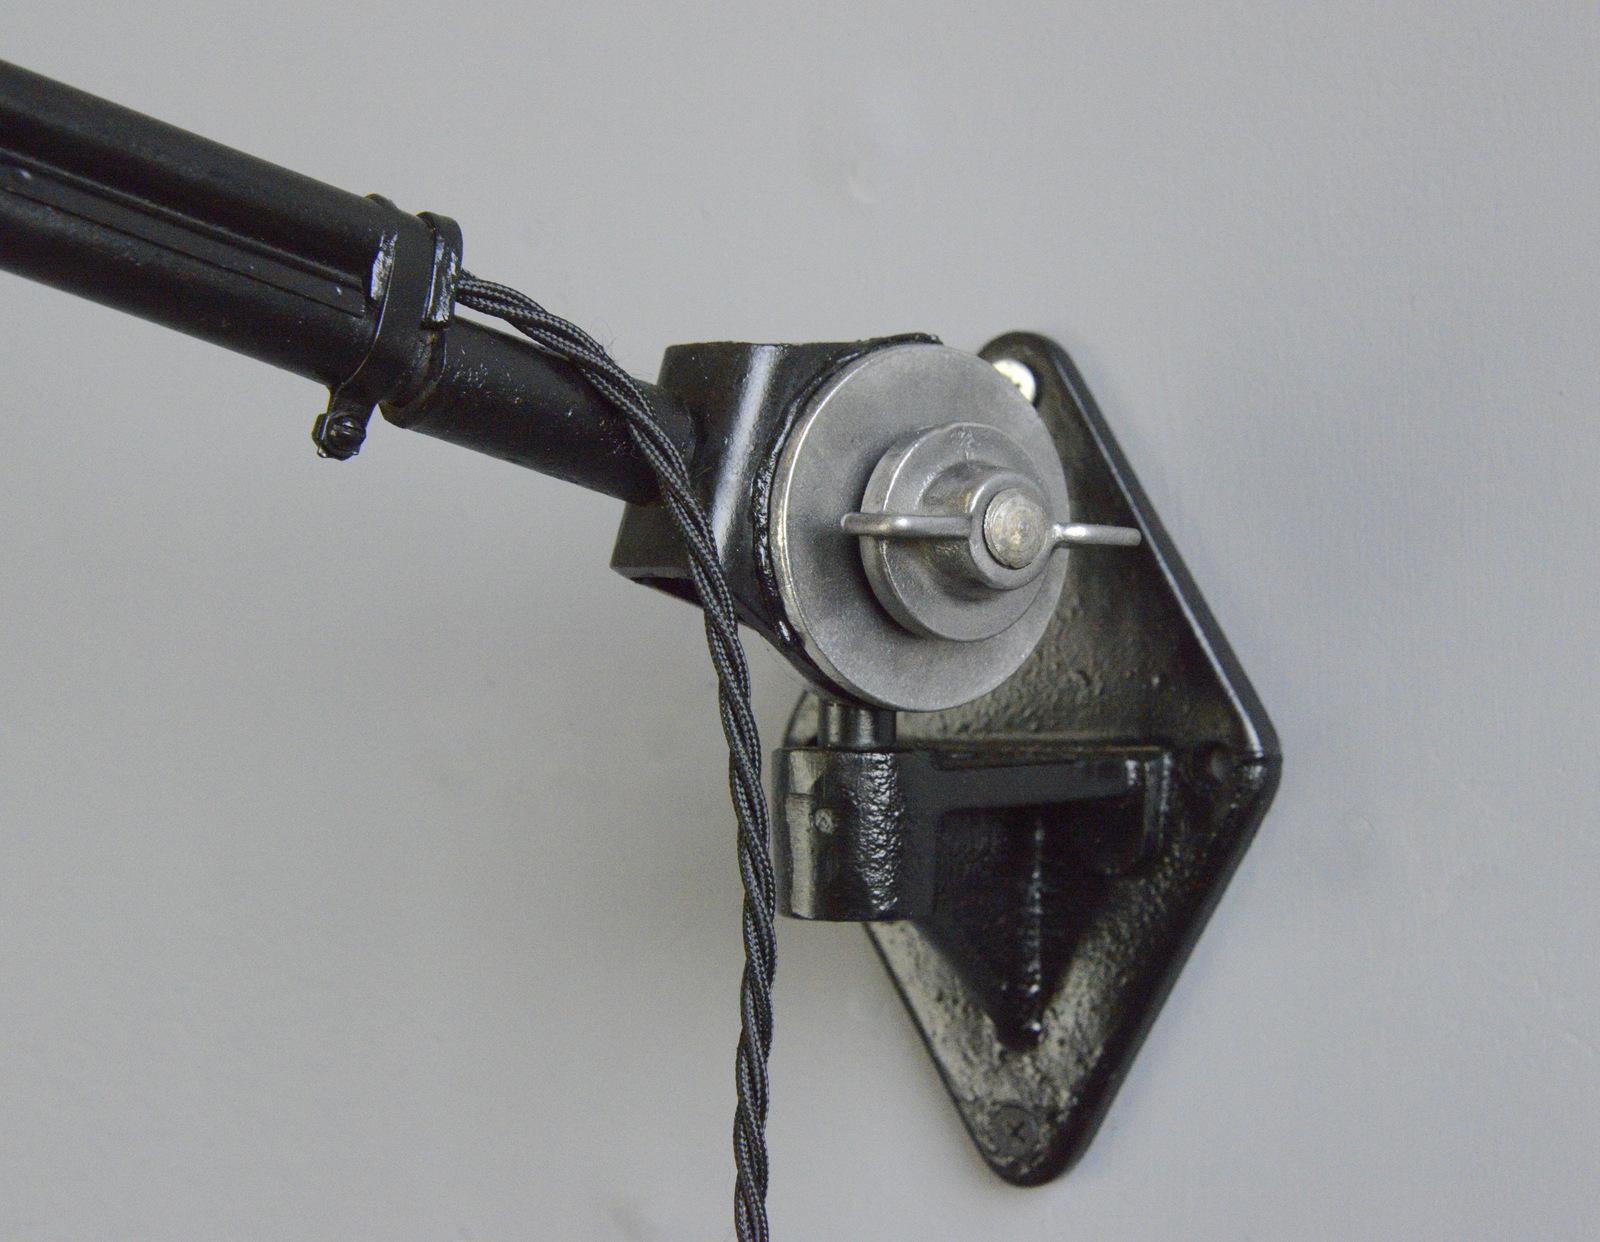 Steel Wall-Mounted Task Lamp by Rademacher, circa 1920s